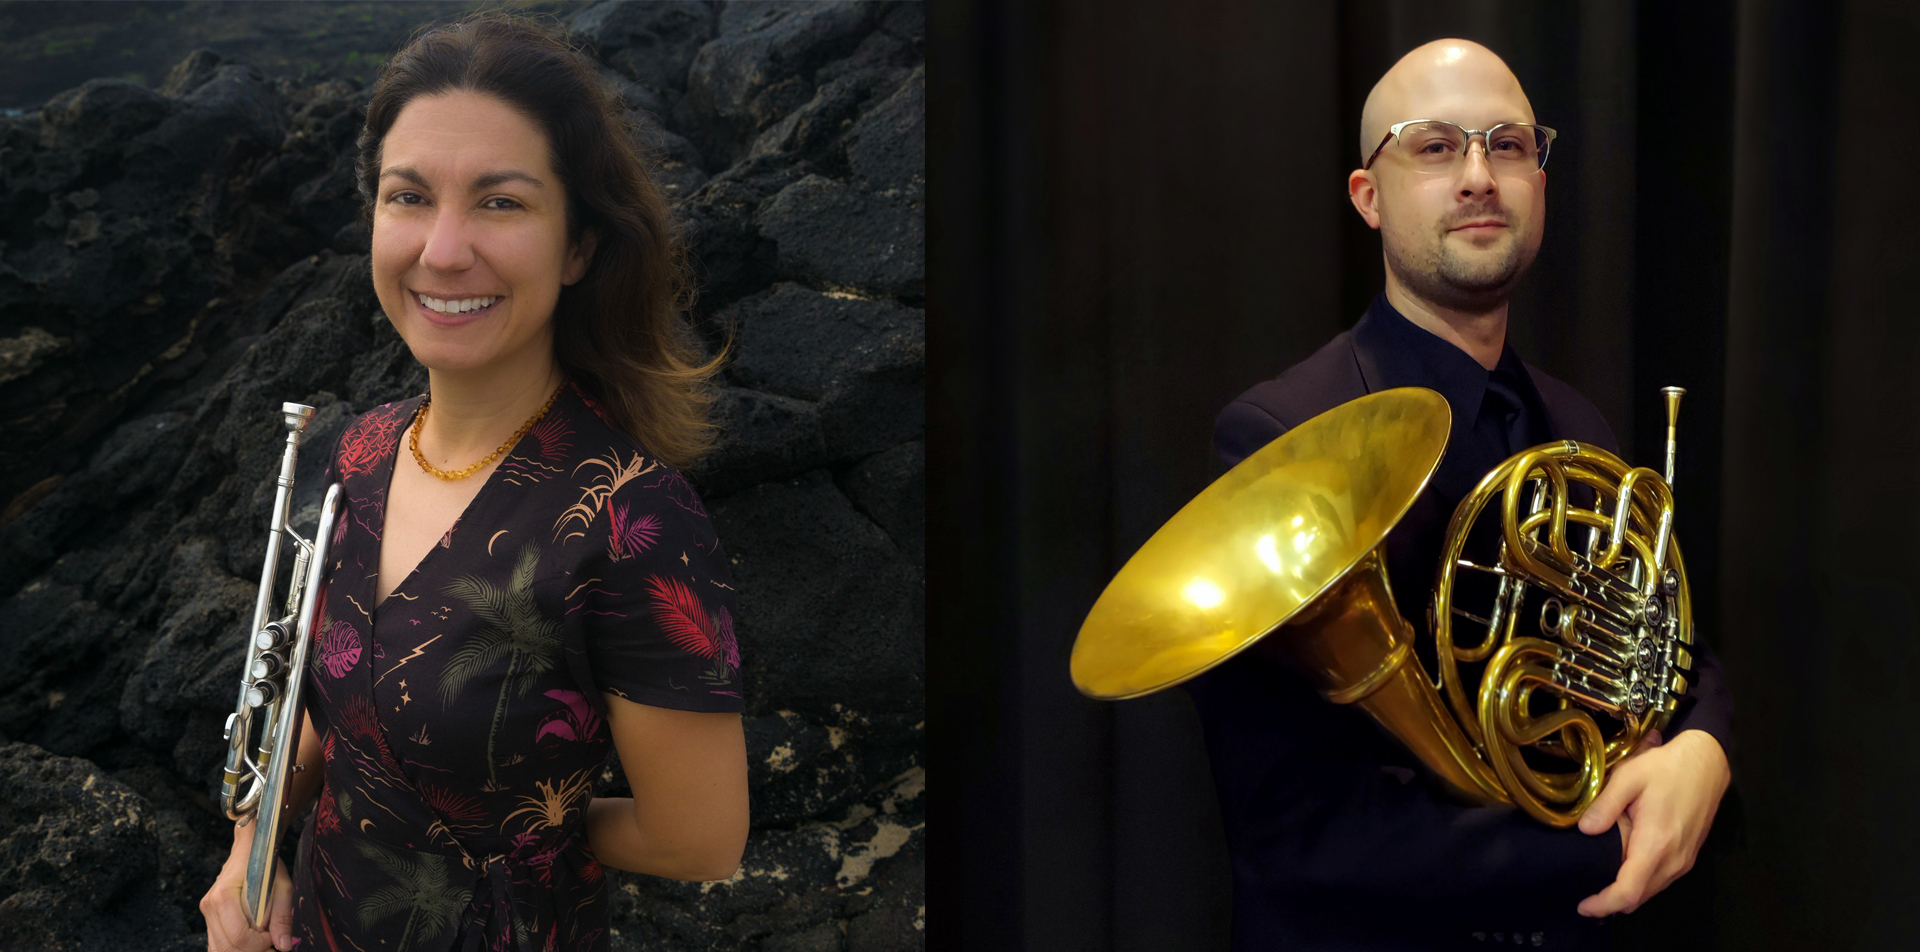 Meet TSO’s Newest Brass Players JoAnn Lamolino, Trumpet and Mike Mesner, Horn